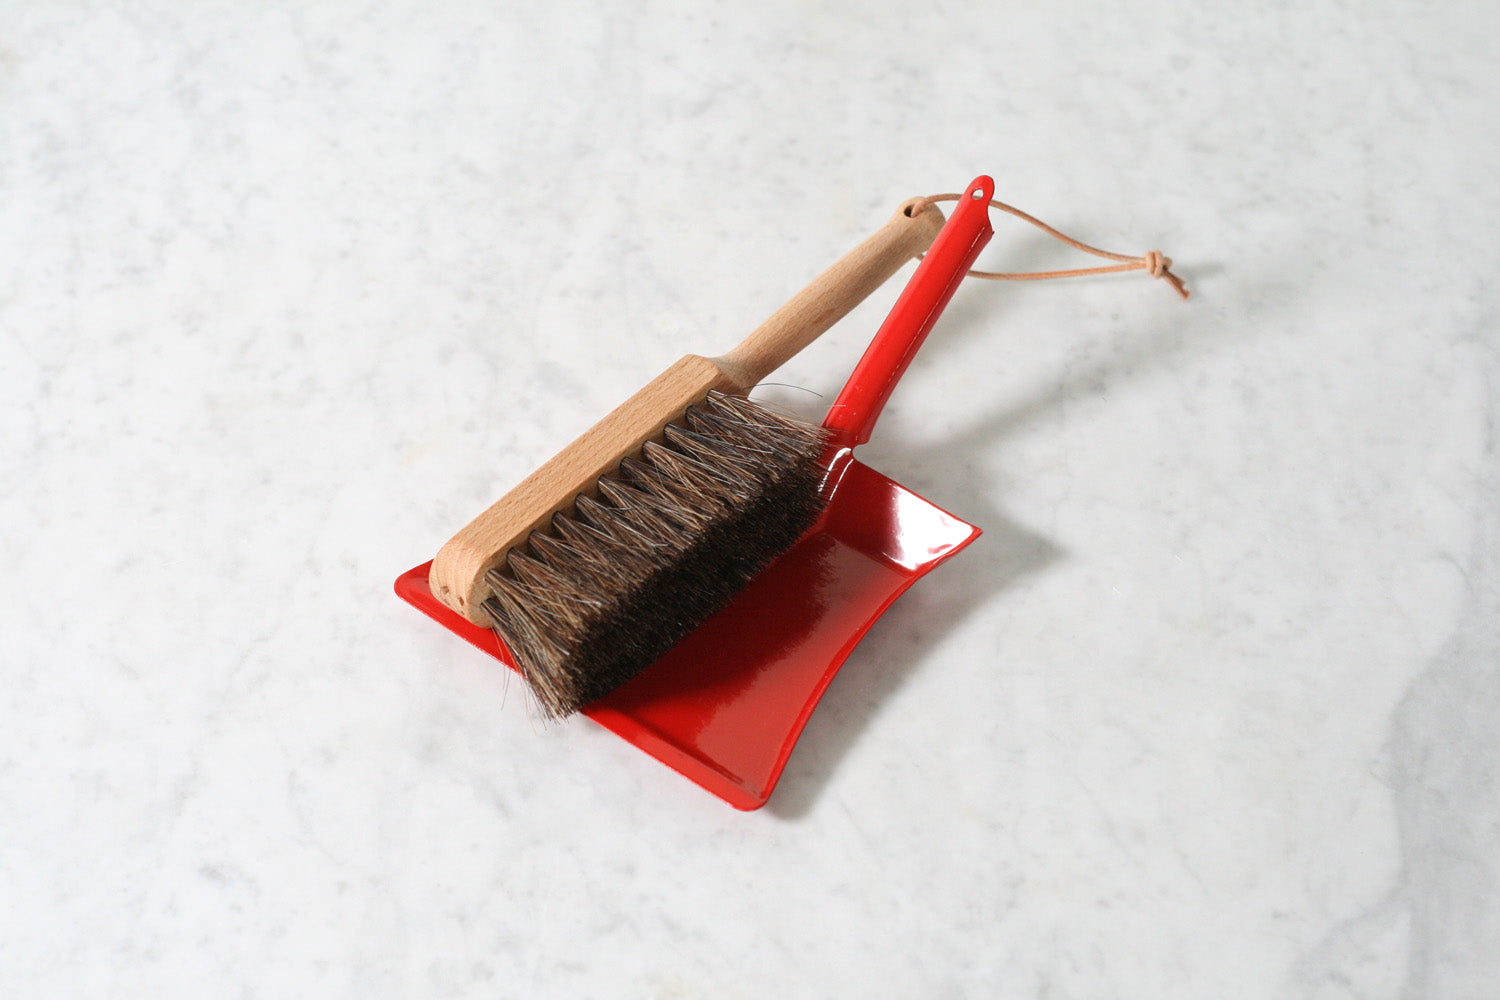 Dust Pan with Brush Set